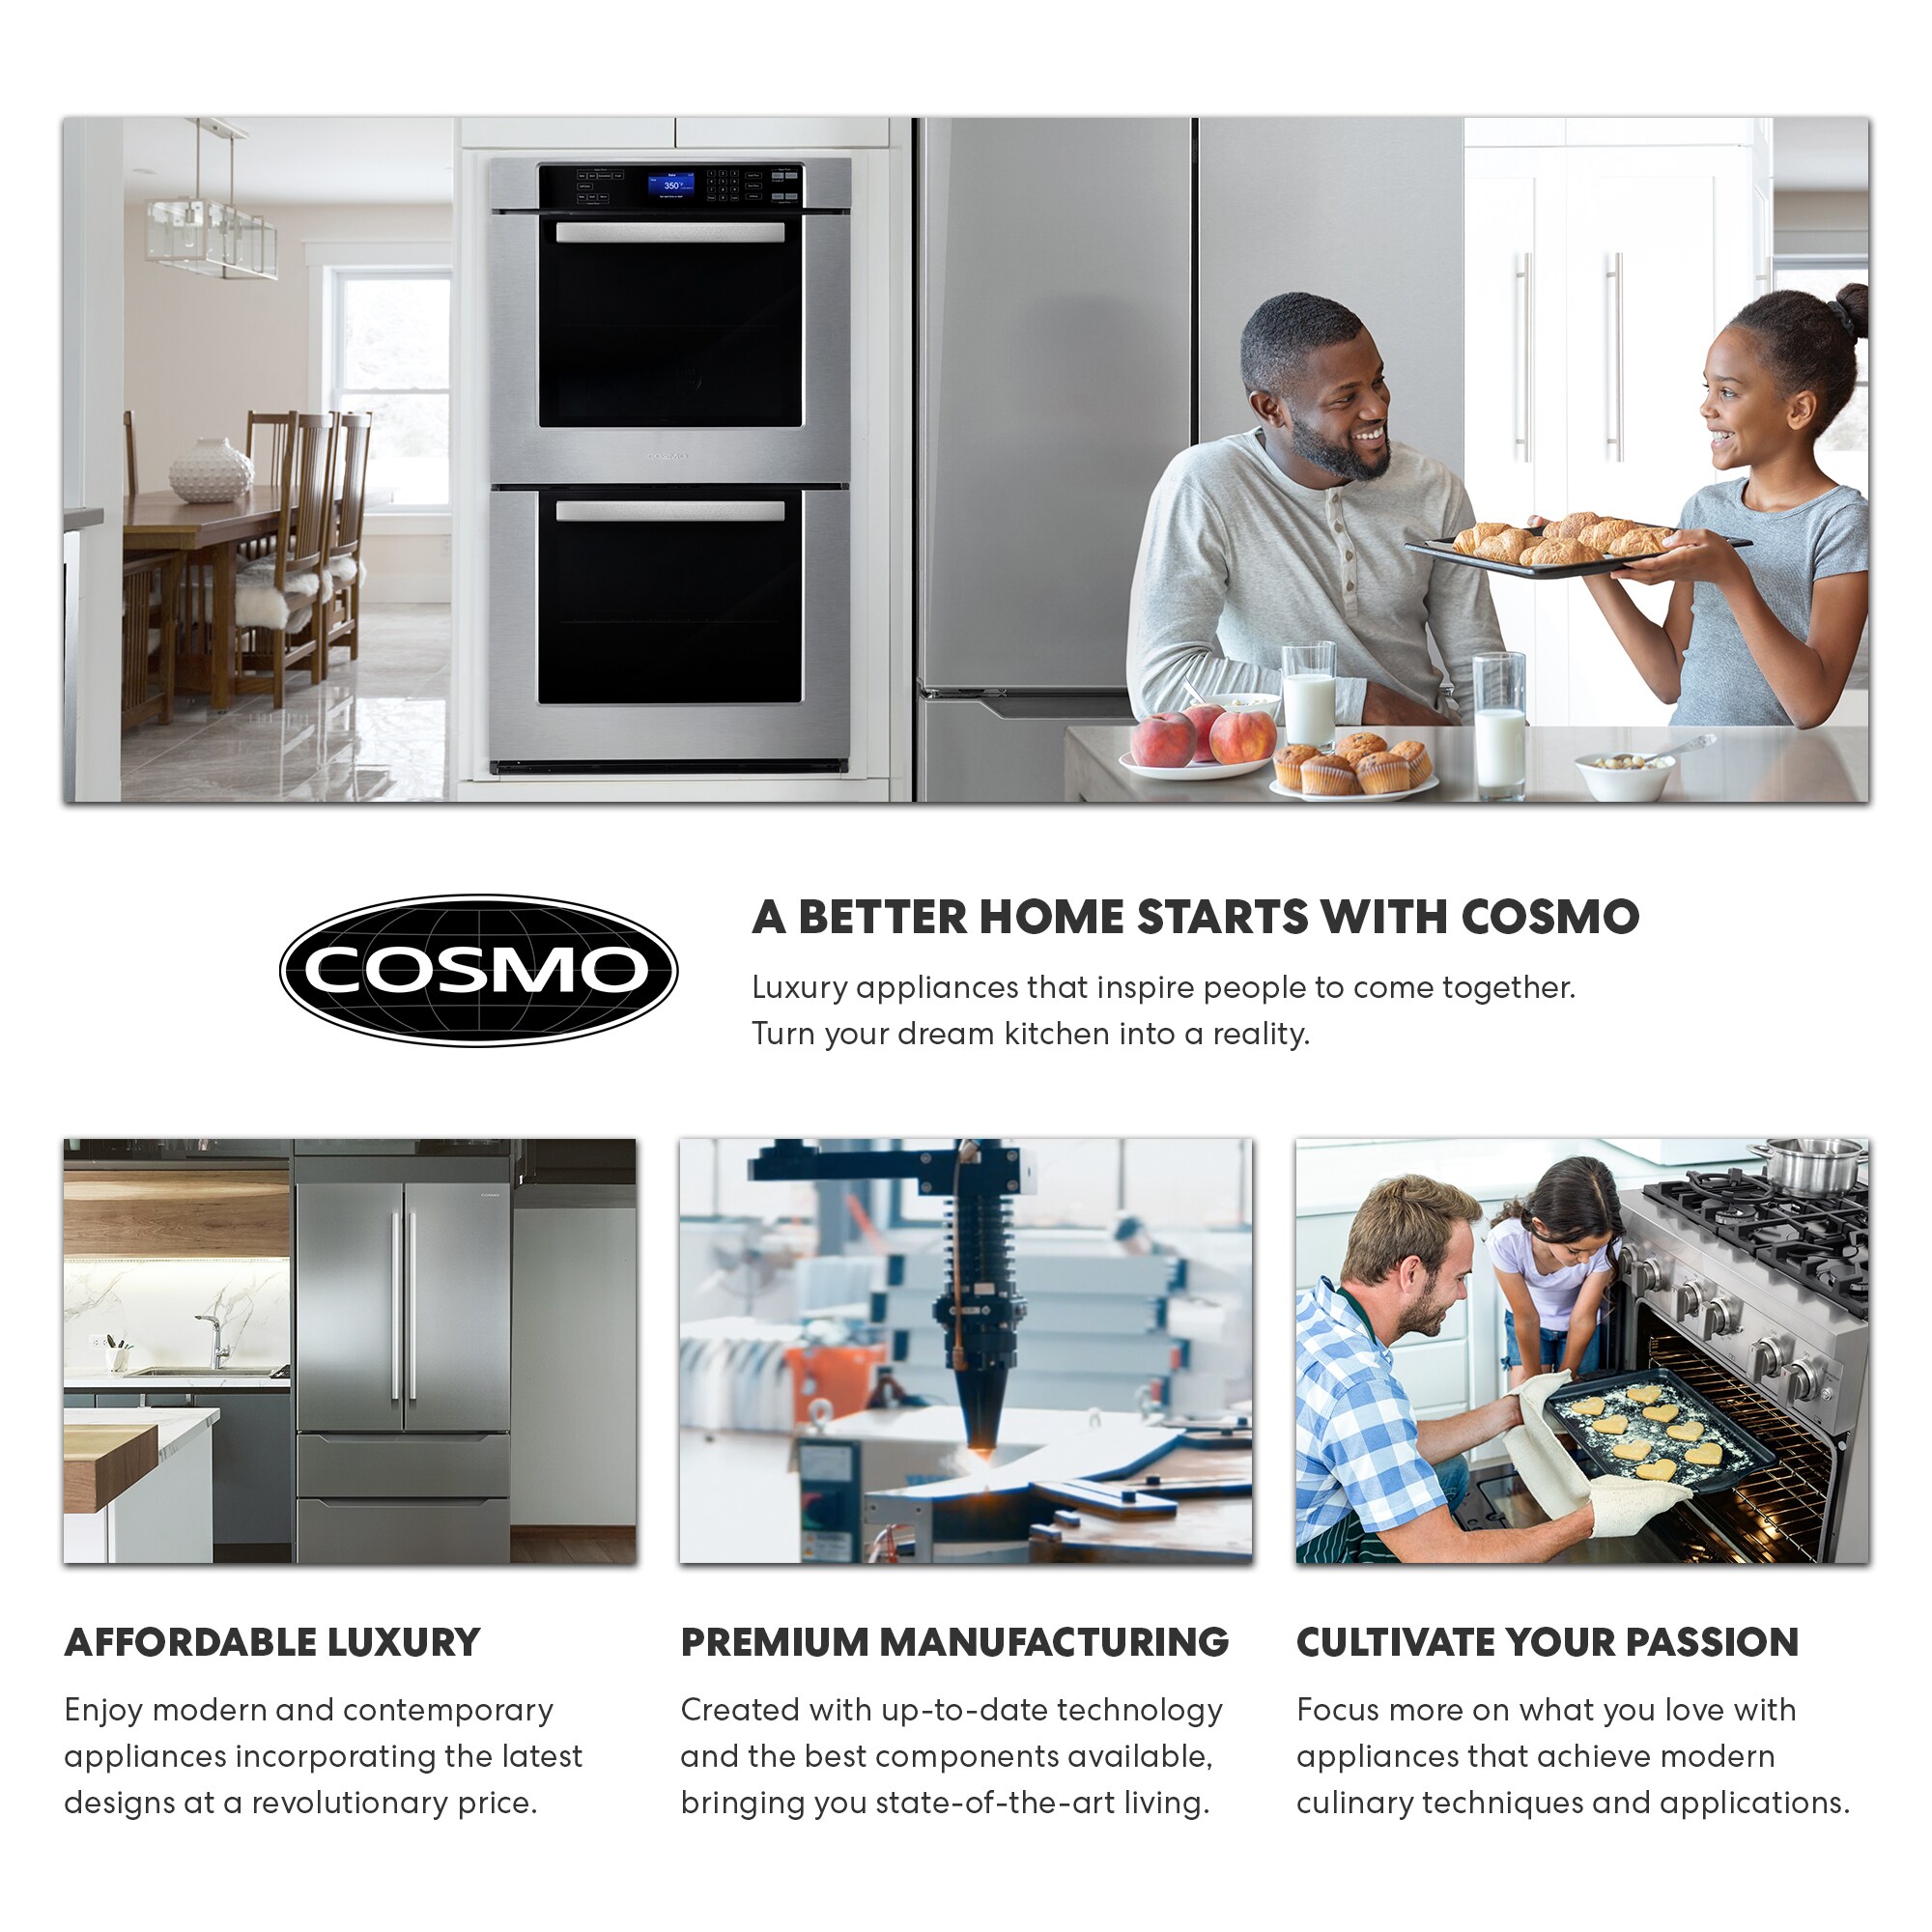 COSMO COS-EPGR244 24 in 3.73 cu ft Cast Iron Grates Slide-in Freestanding Gas Range with 4 Sealed Burners Capacity Convection Oven in Stainless Steel 